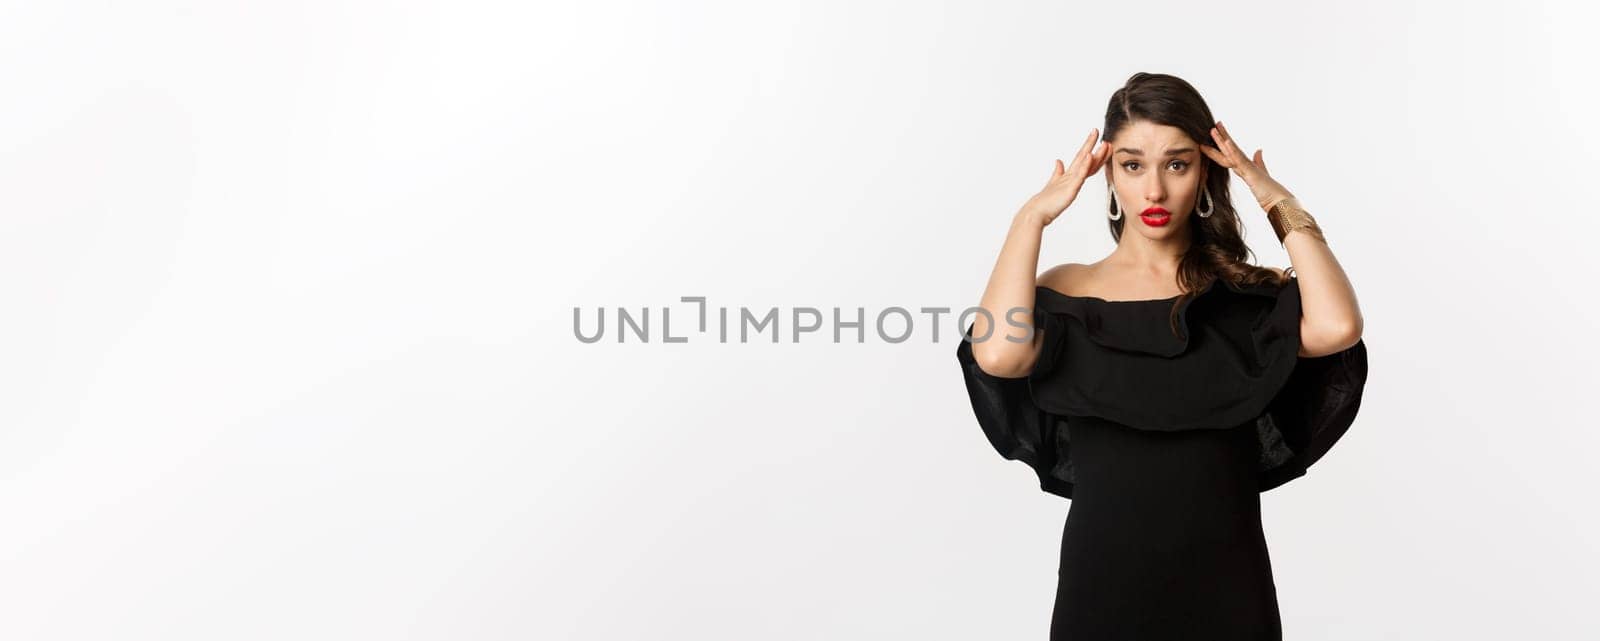 Fashion and beauty. Annoyed and tired woman in black dress, touching head and roll eyes bothered, standing distressed against white background.